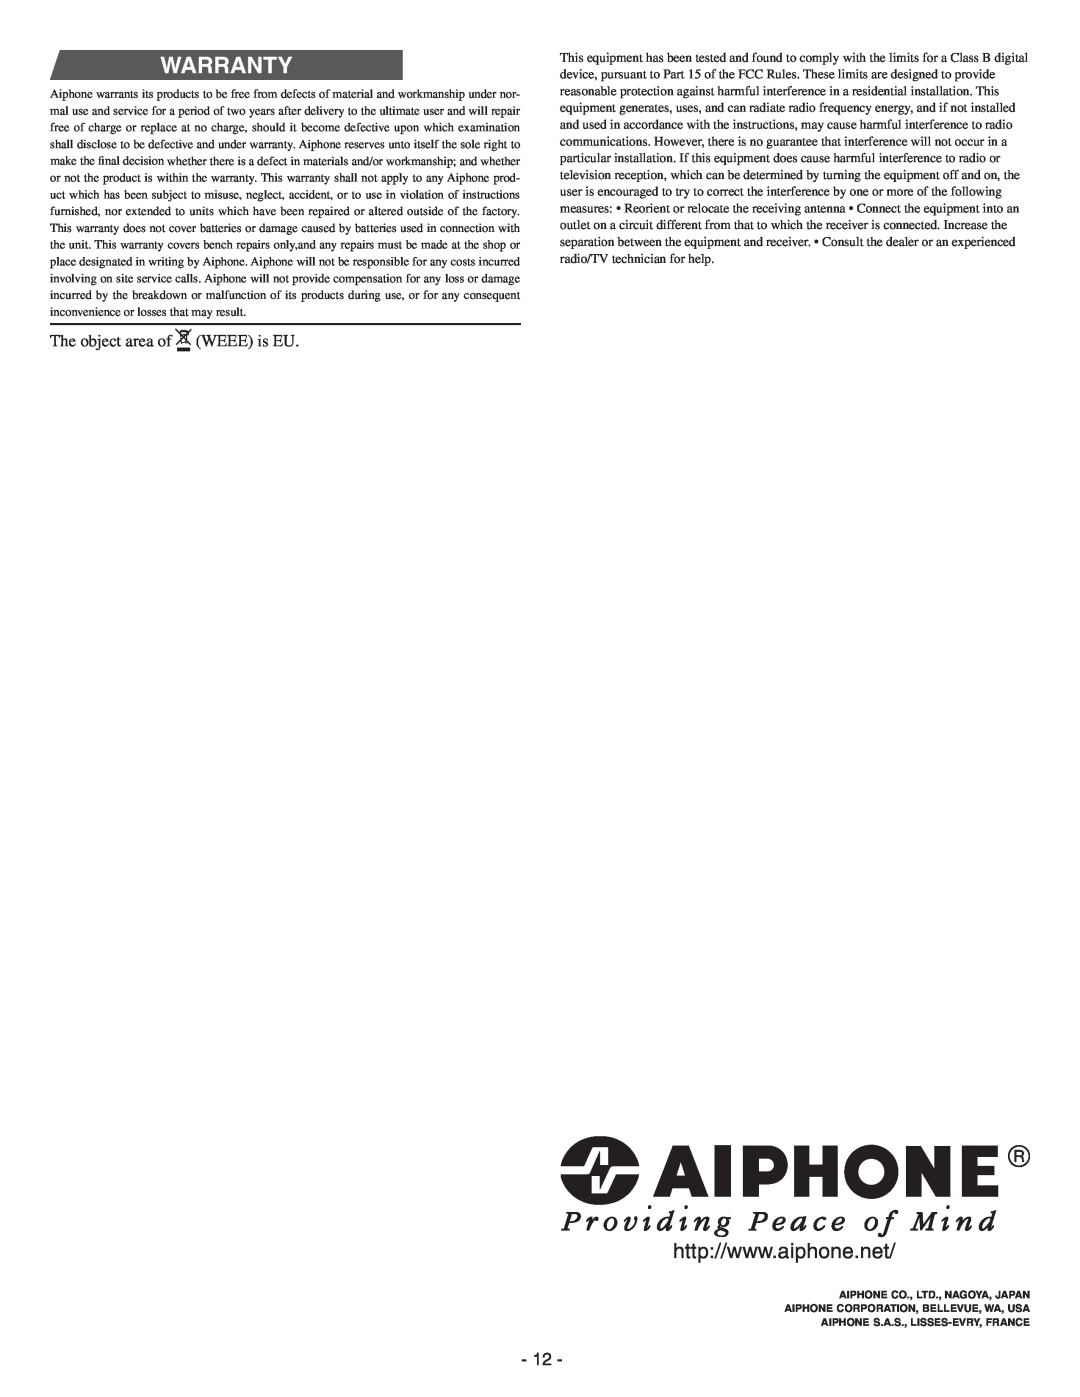 Aiphone GTW-LC service manual Warranty, The object area of WEEE is EU 